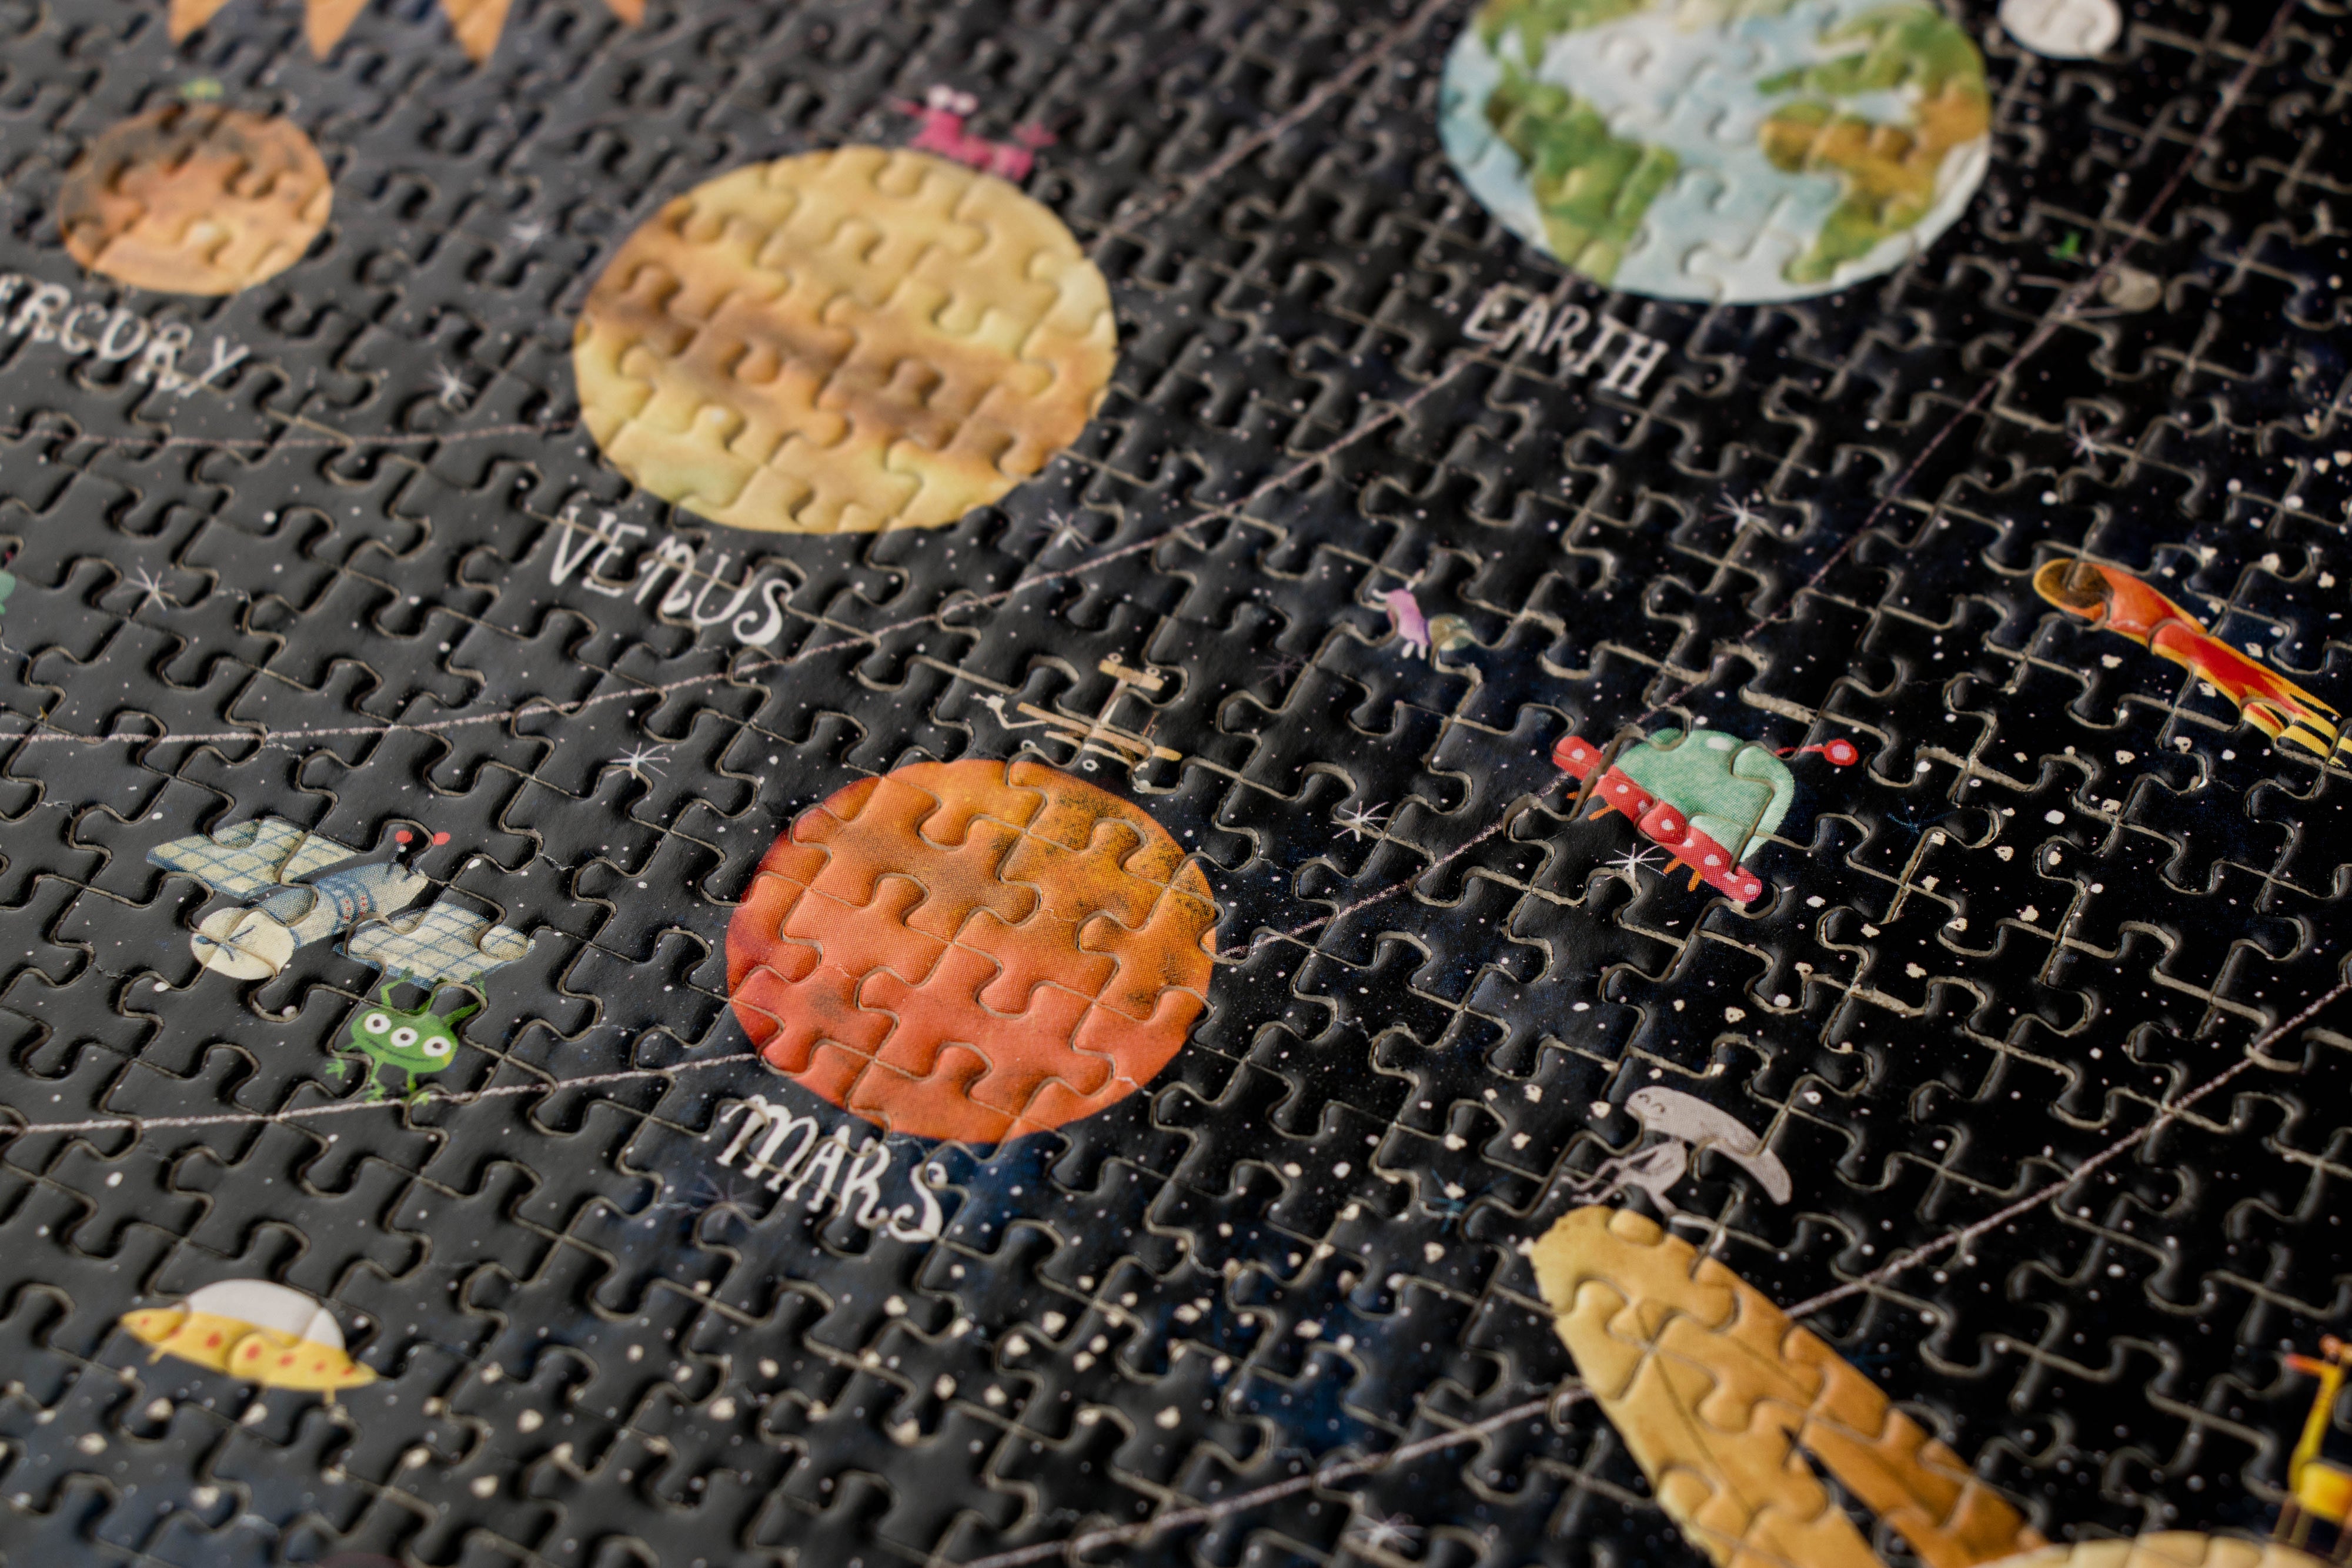 Micropuzzle 600pcs - Discover the Planets